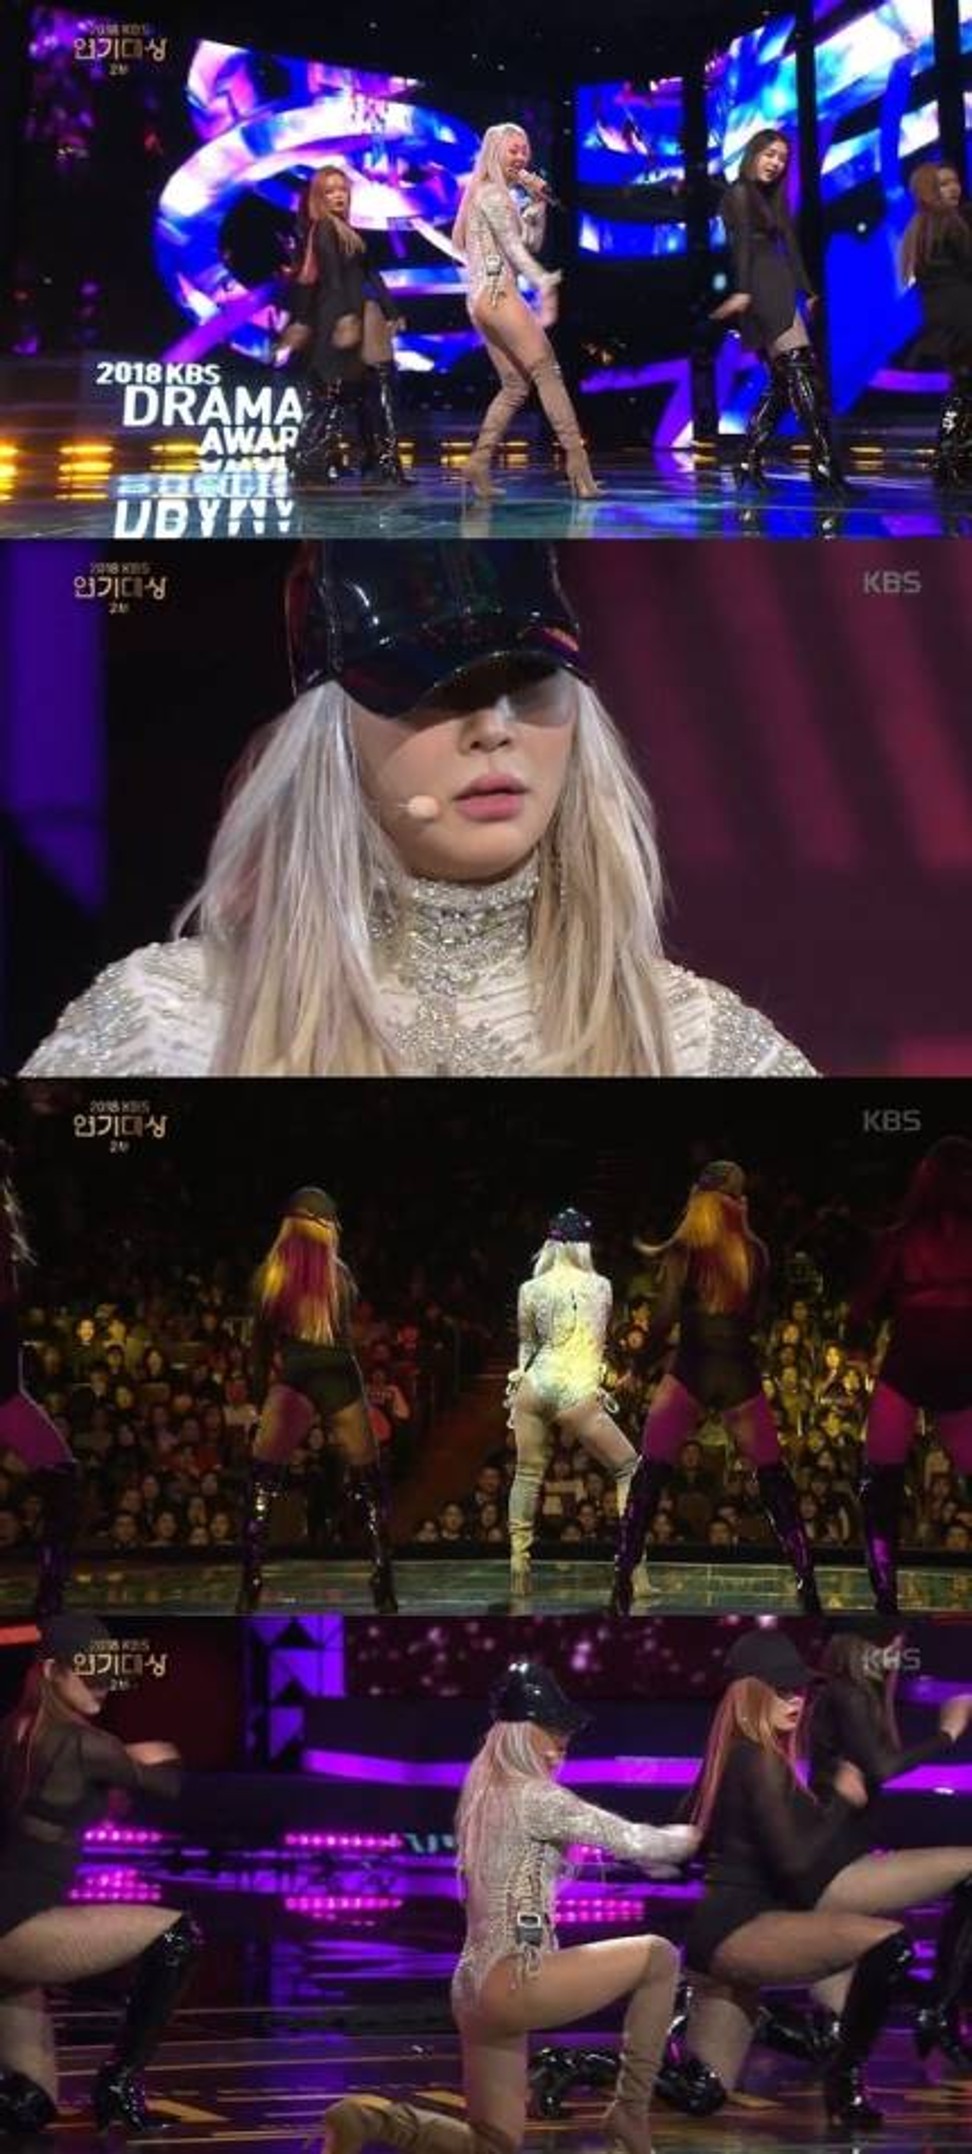 Screen grabs of Hyolyn’s revealing performance at the KBS awards.